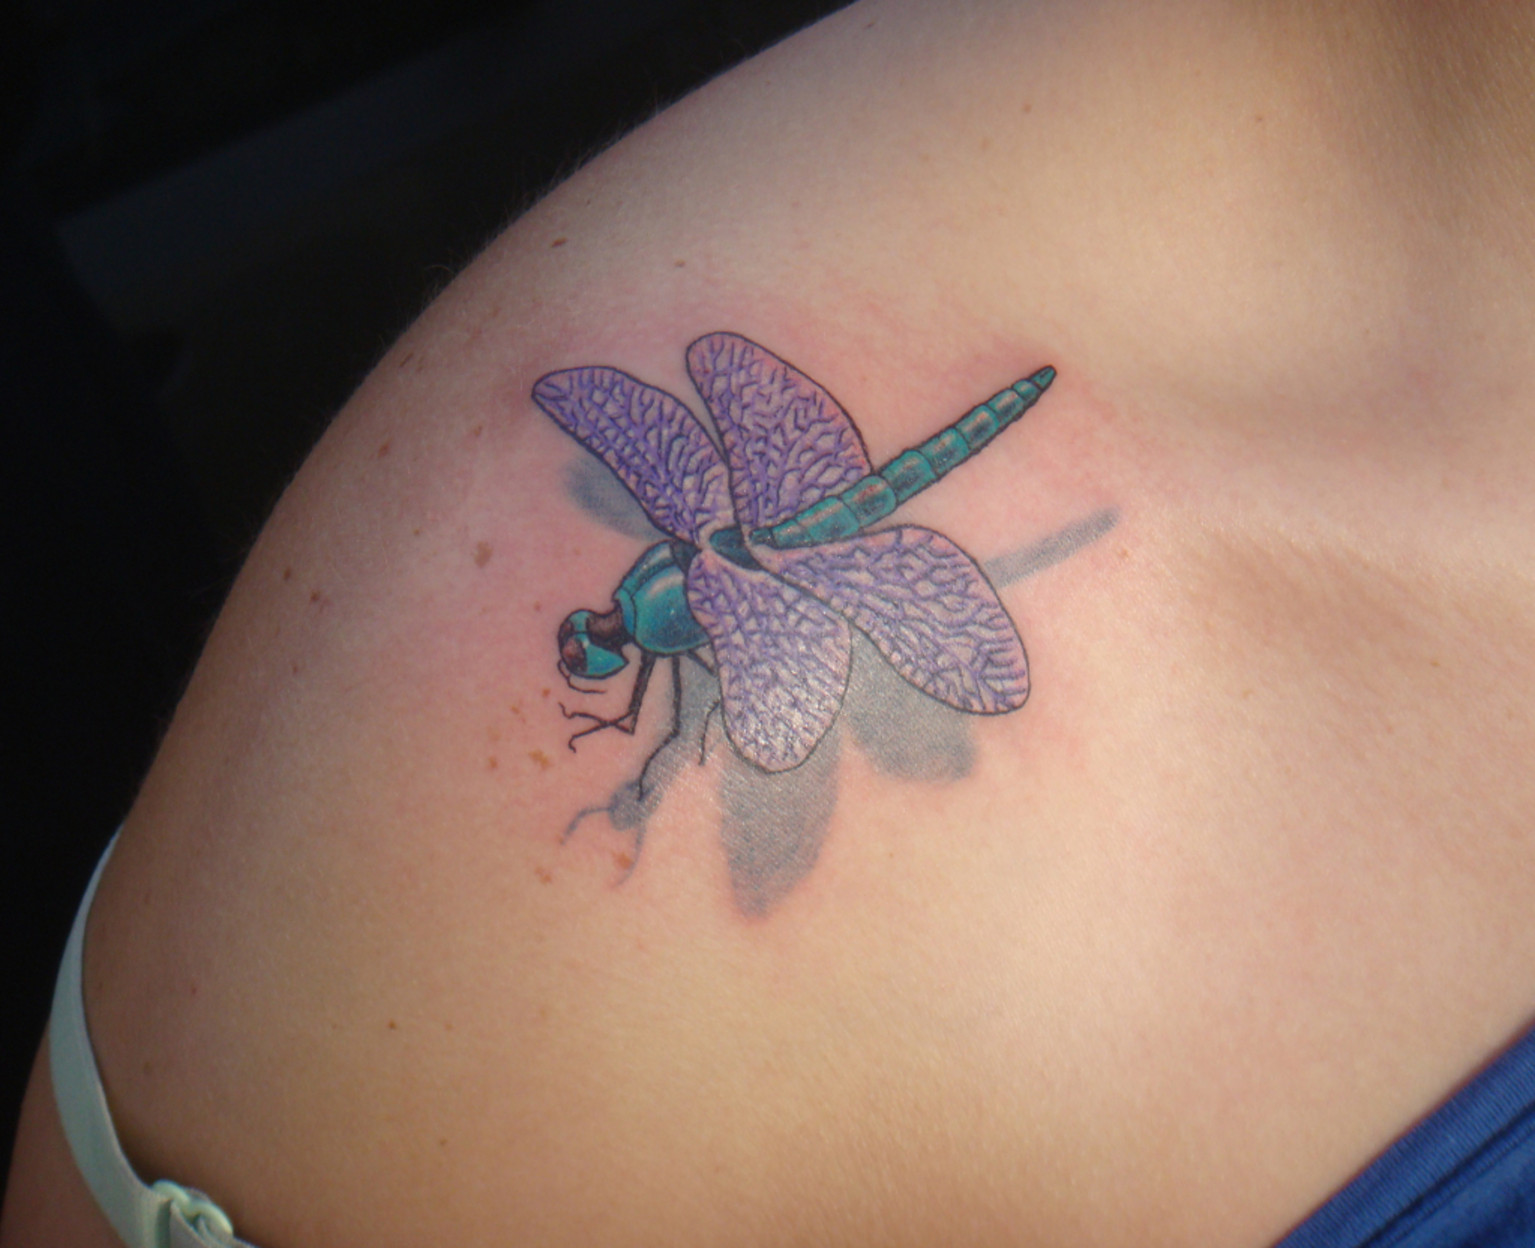 Black and White Dragonfly Tattoo - wide 7